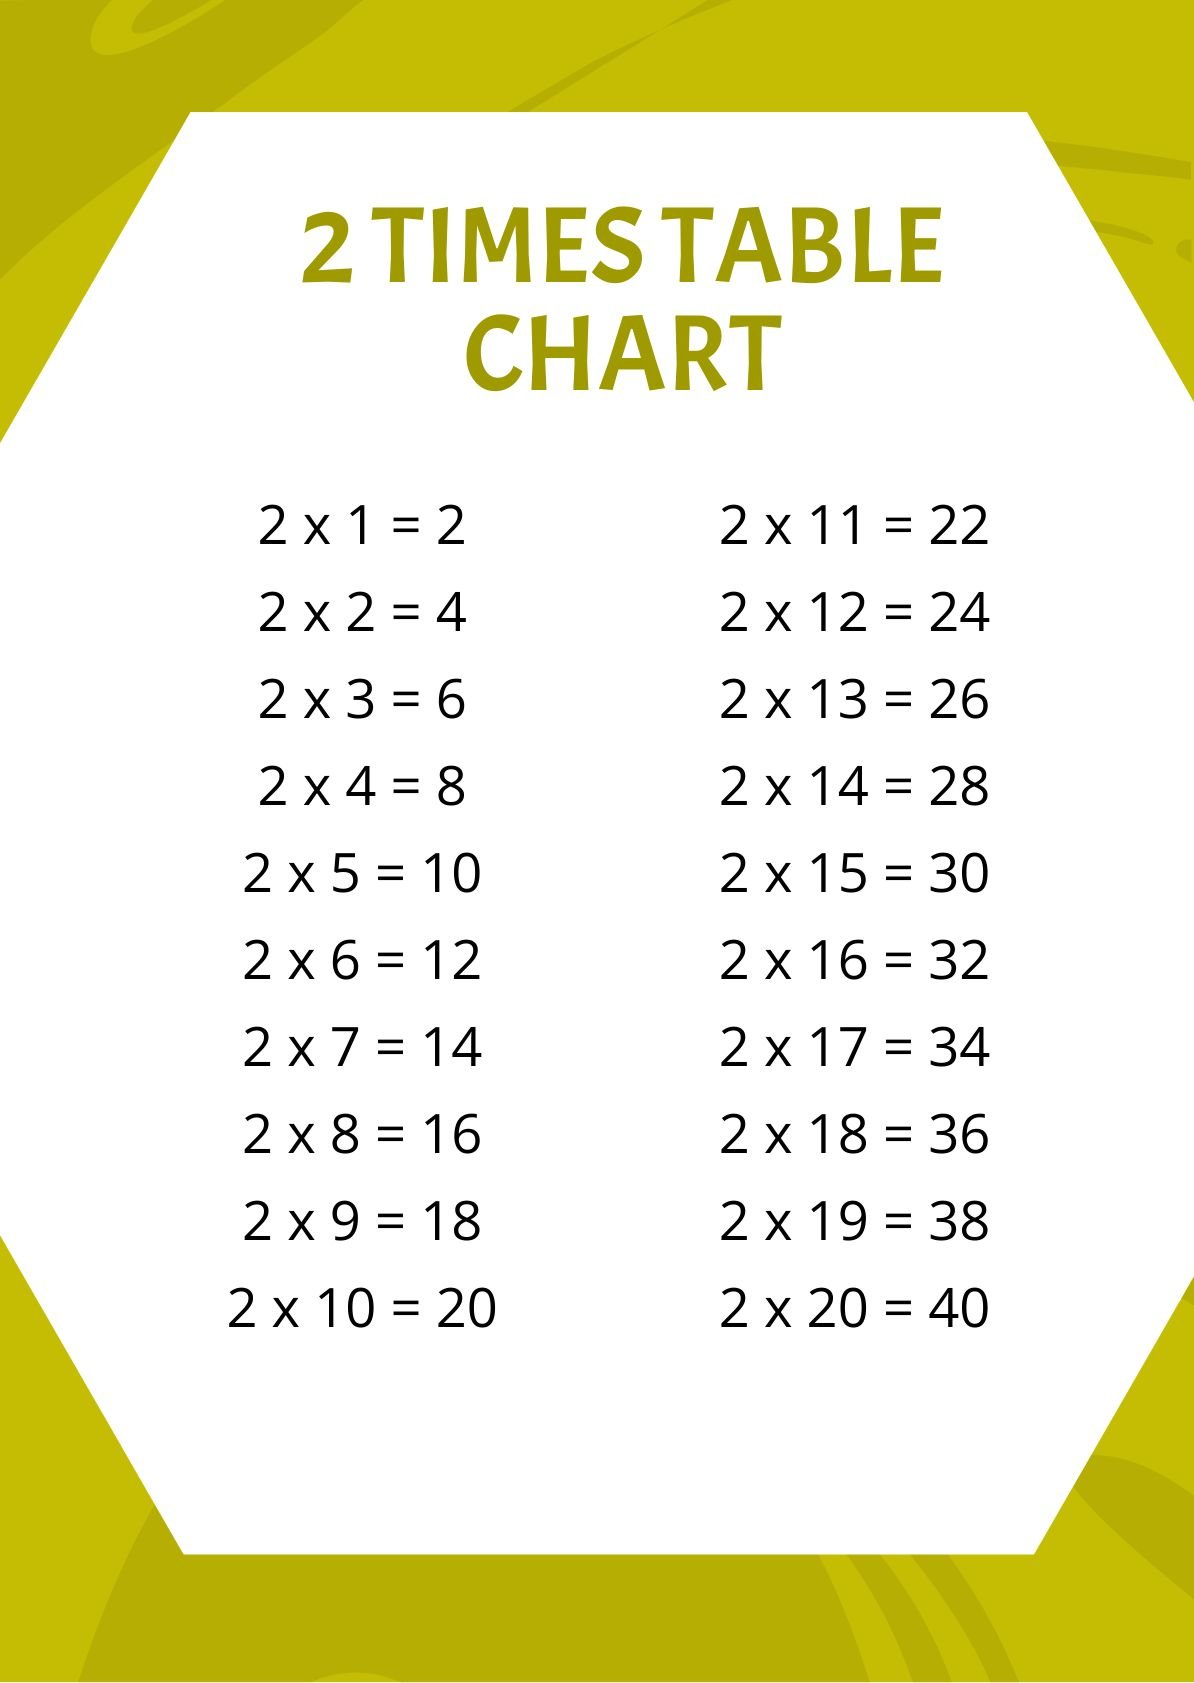 2 Times Table Chart in PDF